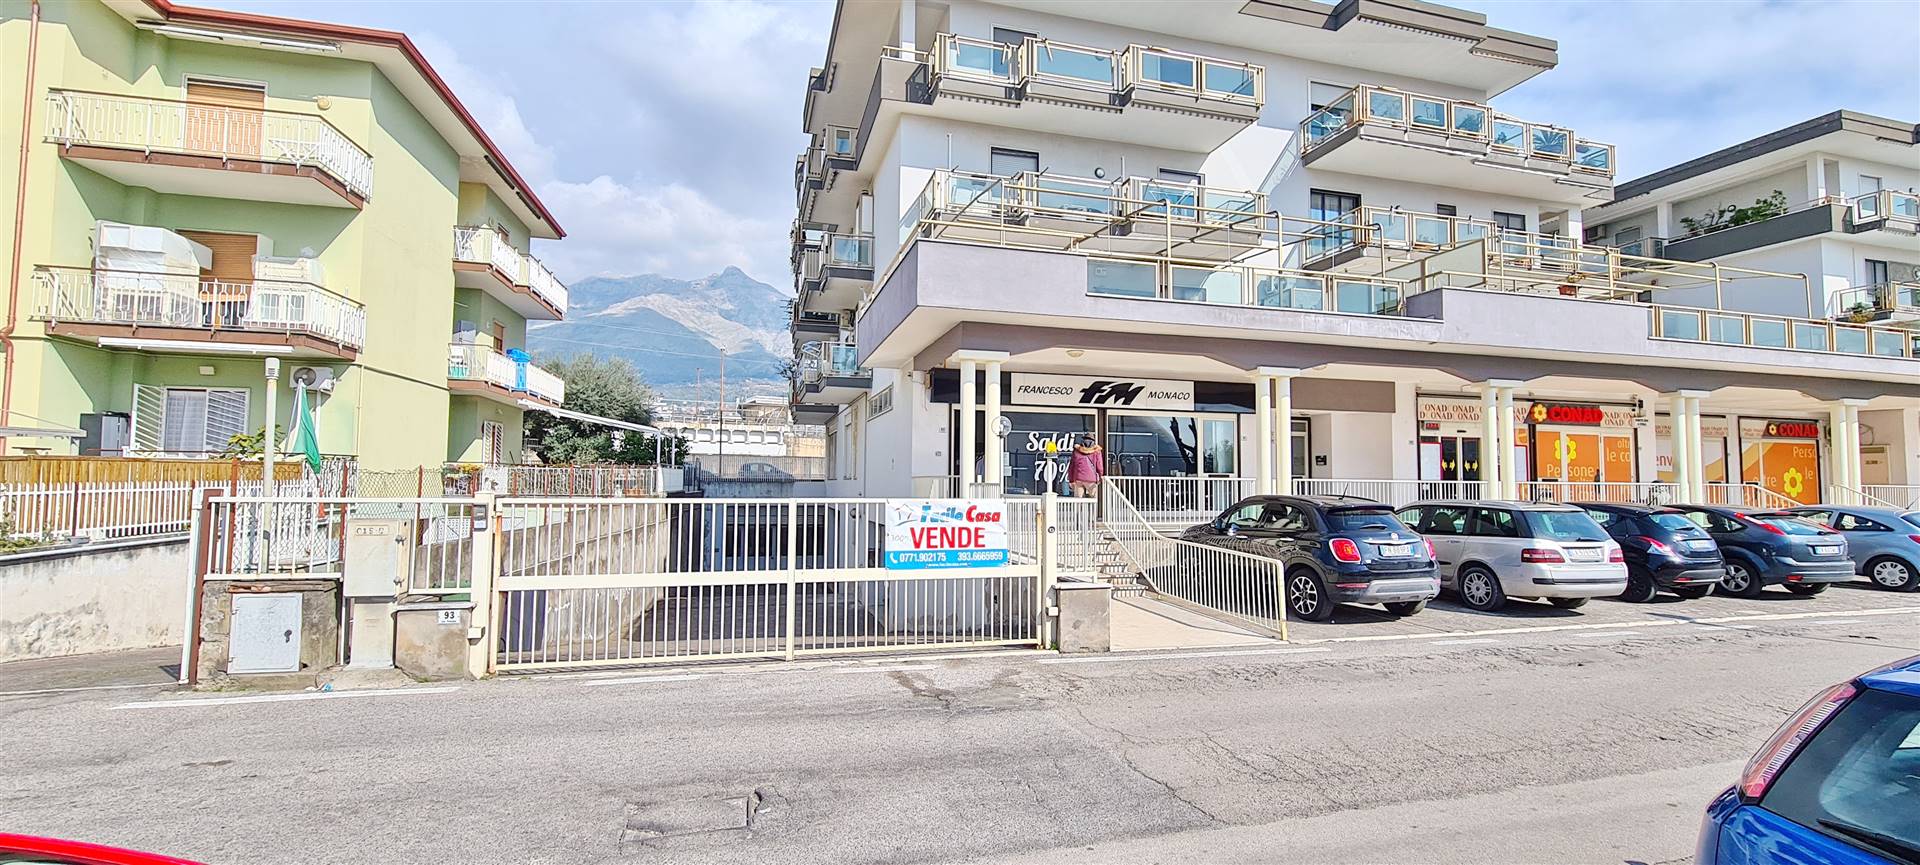 FORMIA, Warehouse for sale of 300 Sq. mt., Habitable, Energetic class: G, placed at Buried, composed by: 1 Room, 1 Bathroom, Price: € 95,000